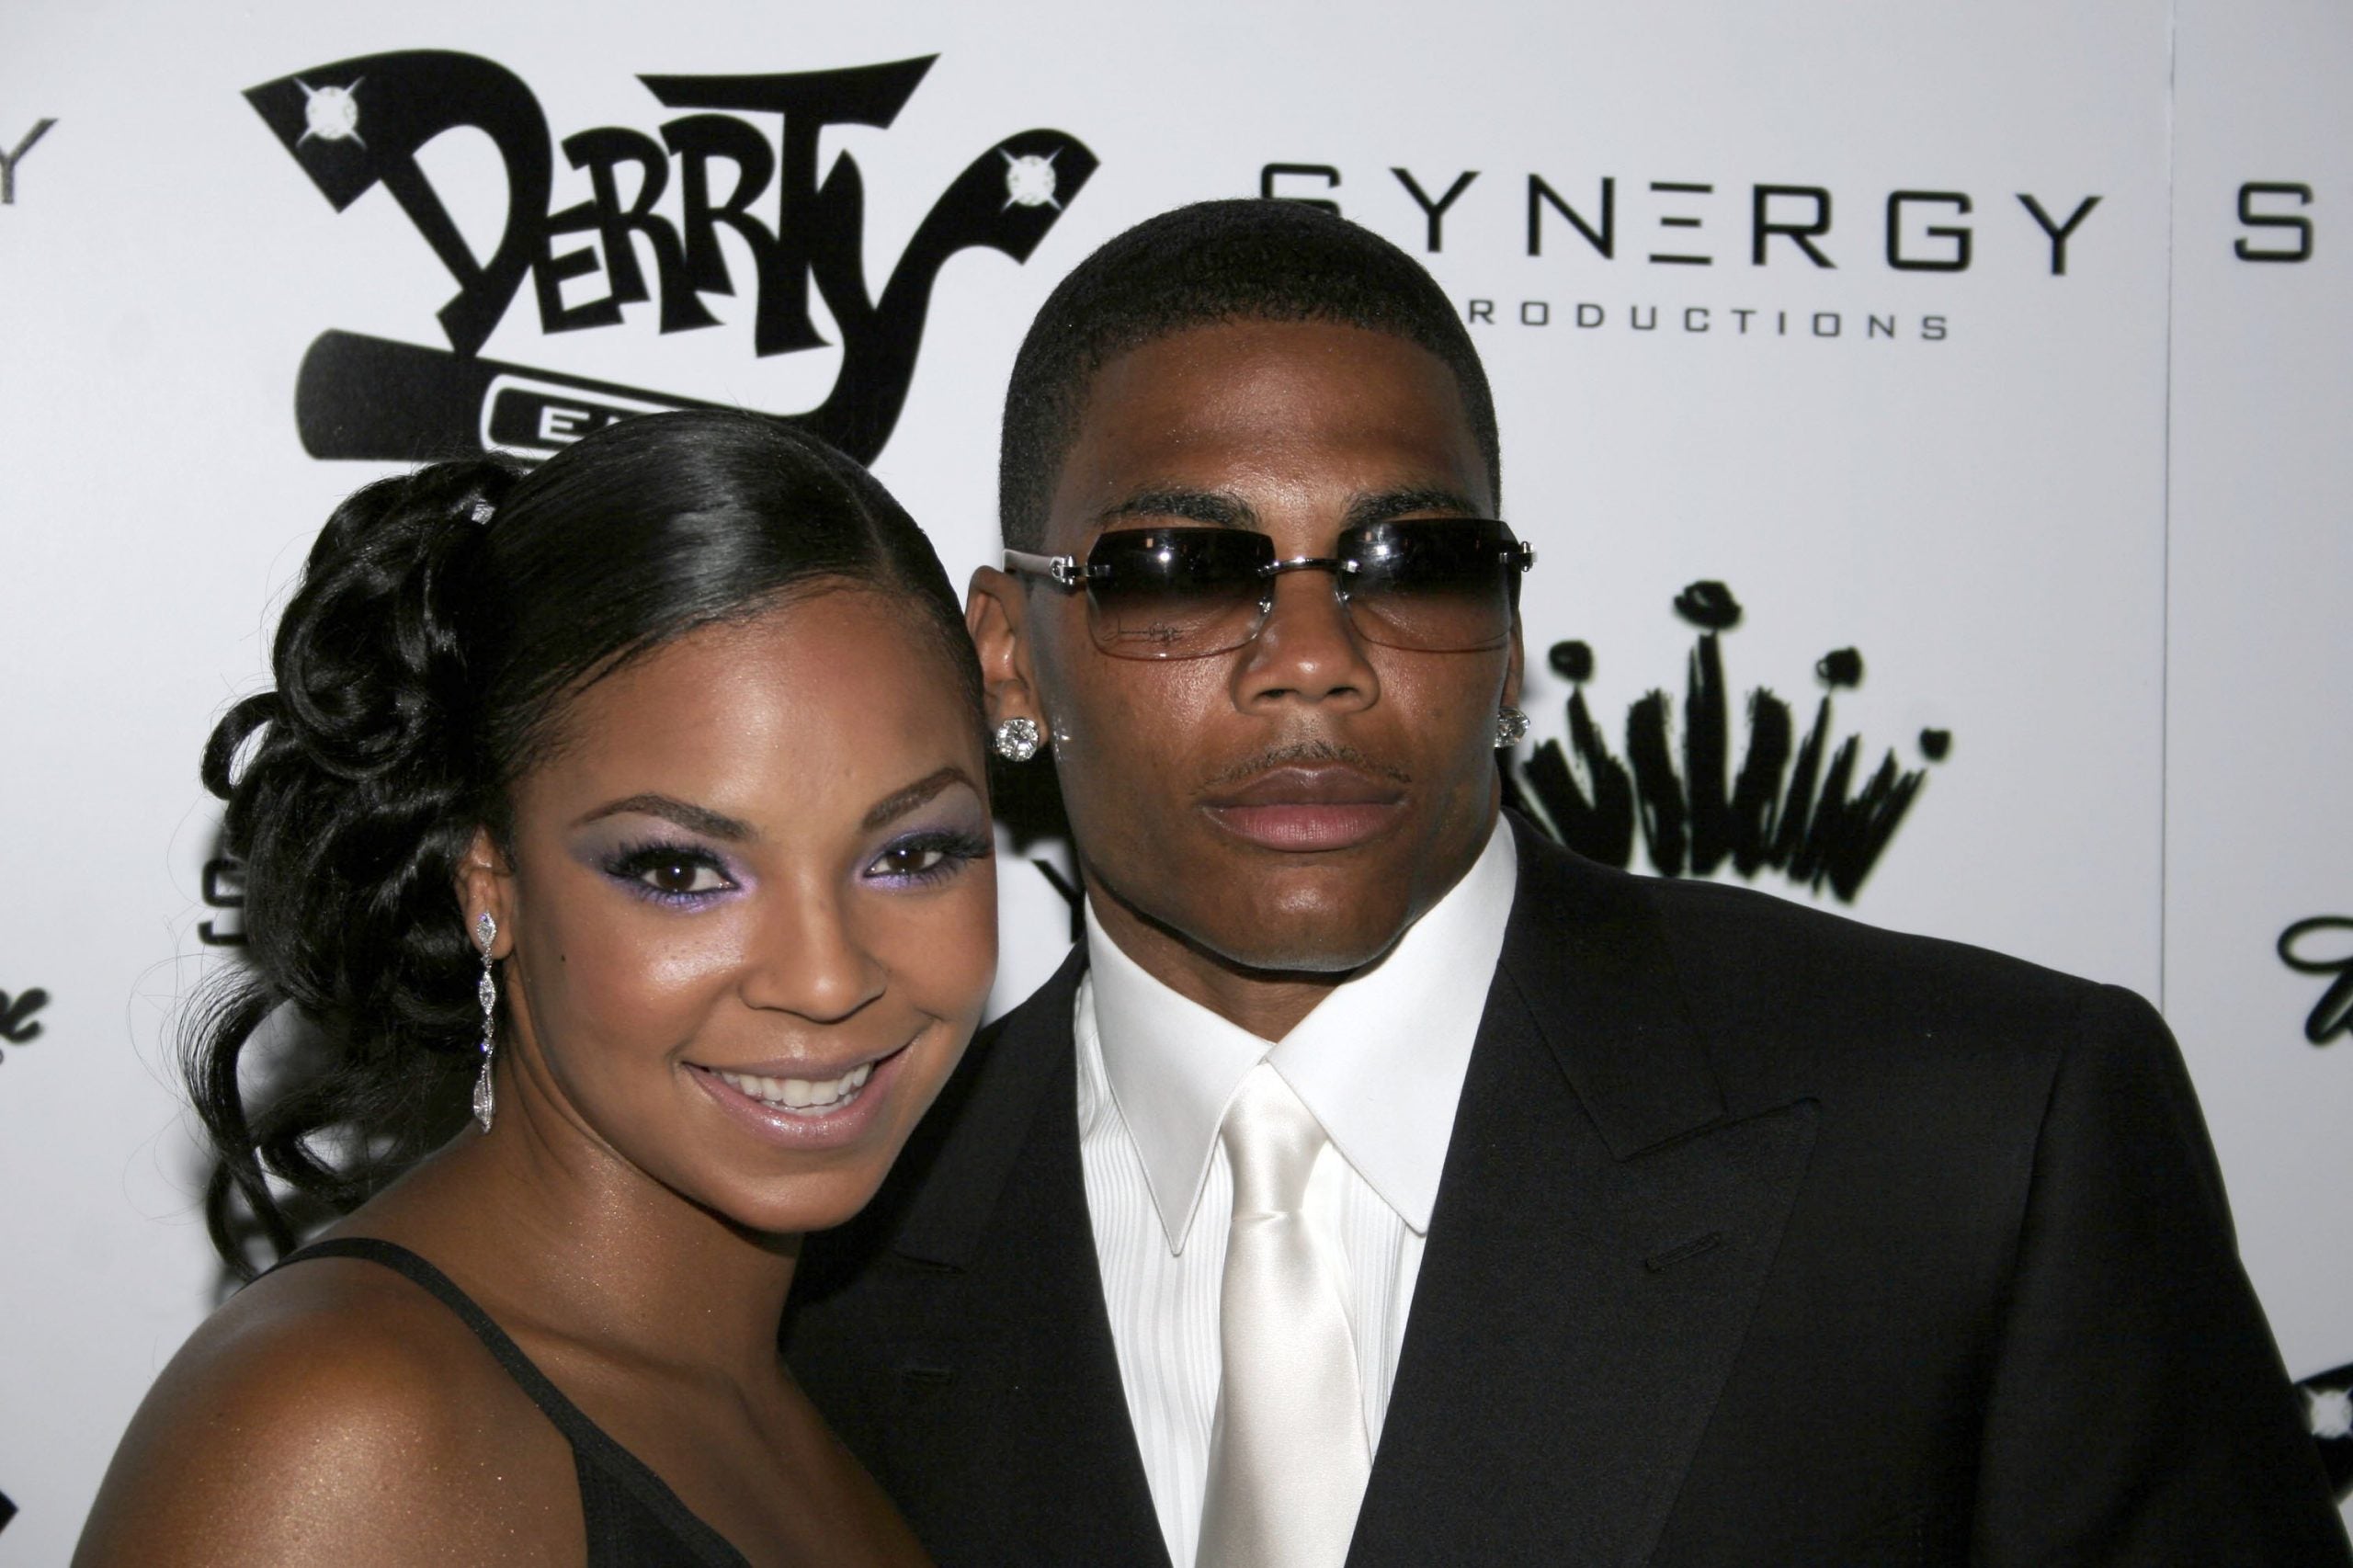 Ashanti Says Hug From Nelly At Verzuz Was Unexpected: 'I Haven't Seen Him Or Spoken To Him Since We Broke Up'